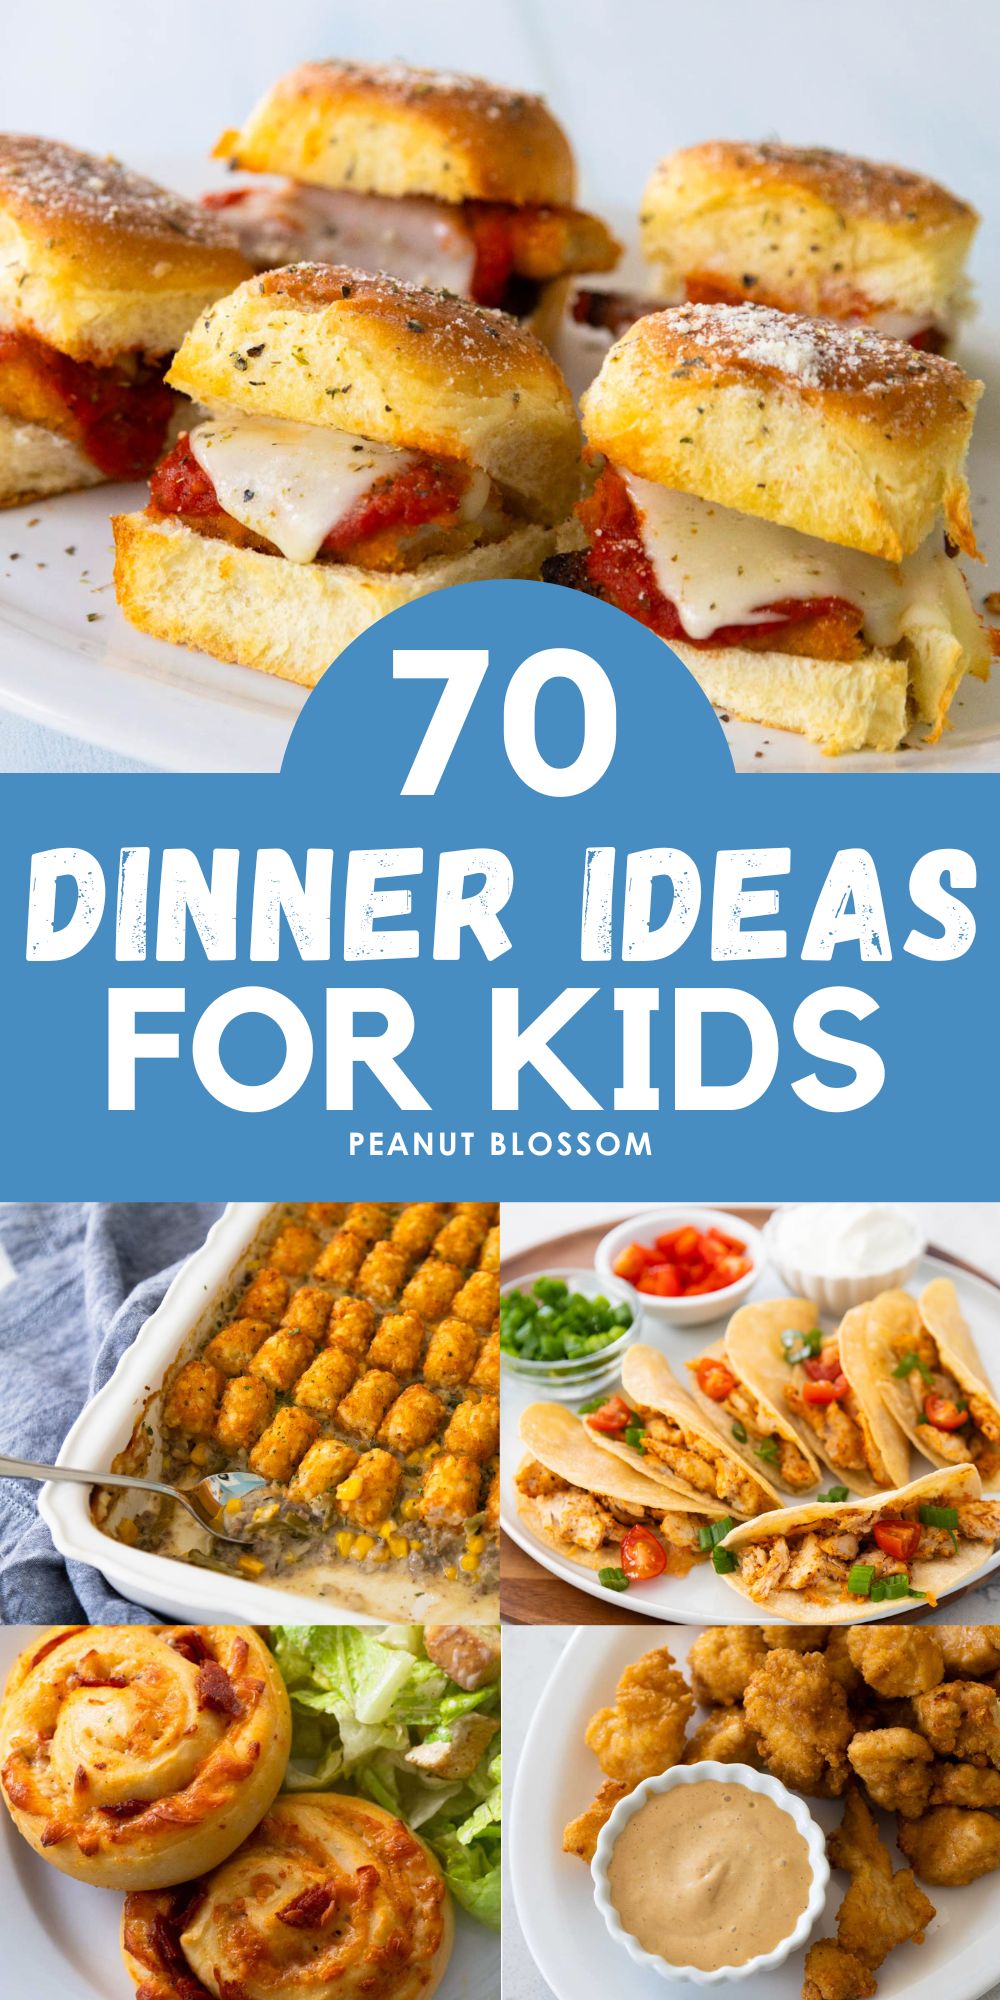 The photo collage shows 5 delicious dinner ideas for picky eaters including chicken nuggets, sliders, and pizza buns.